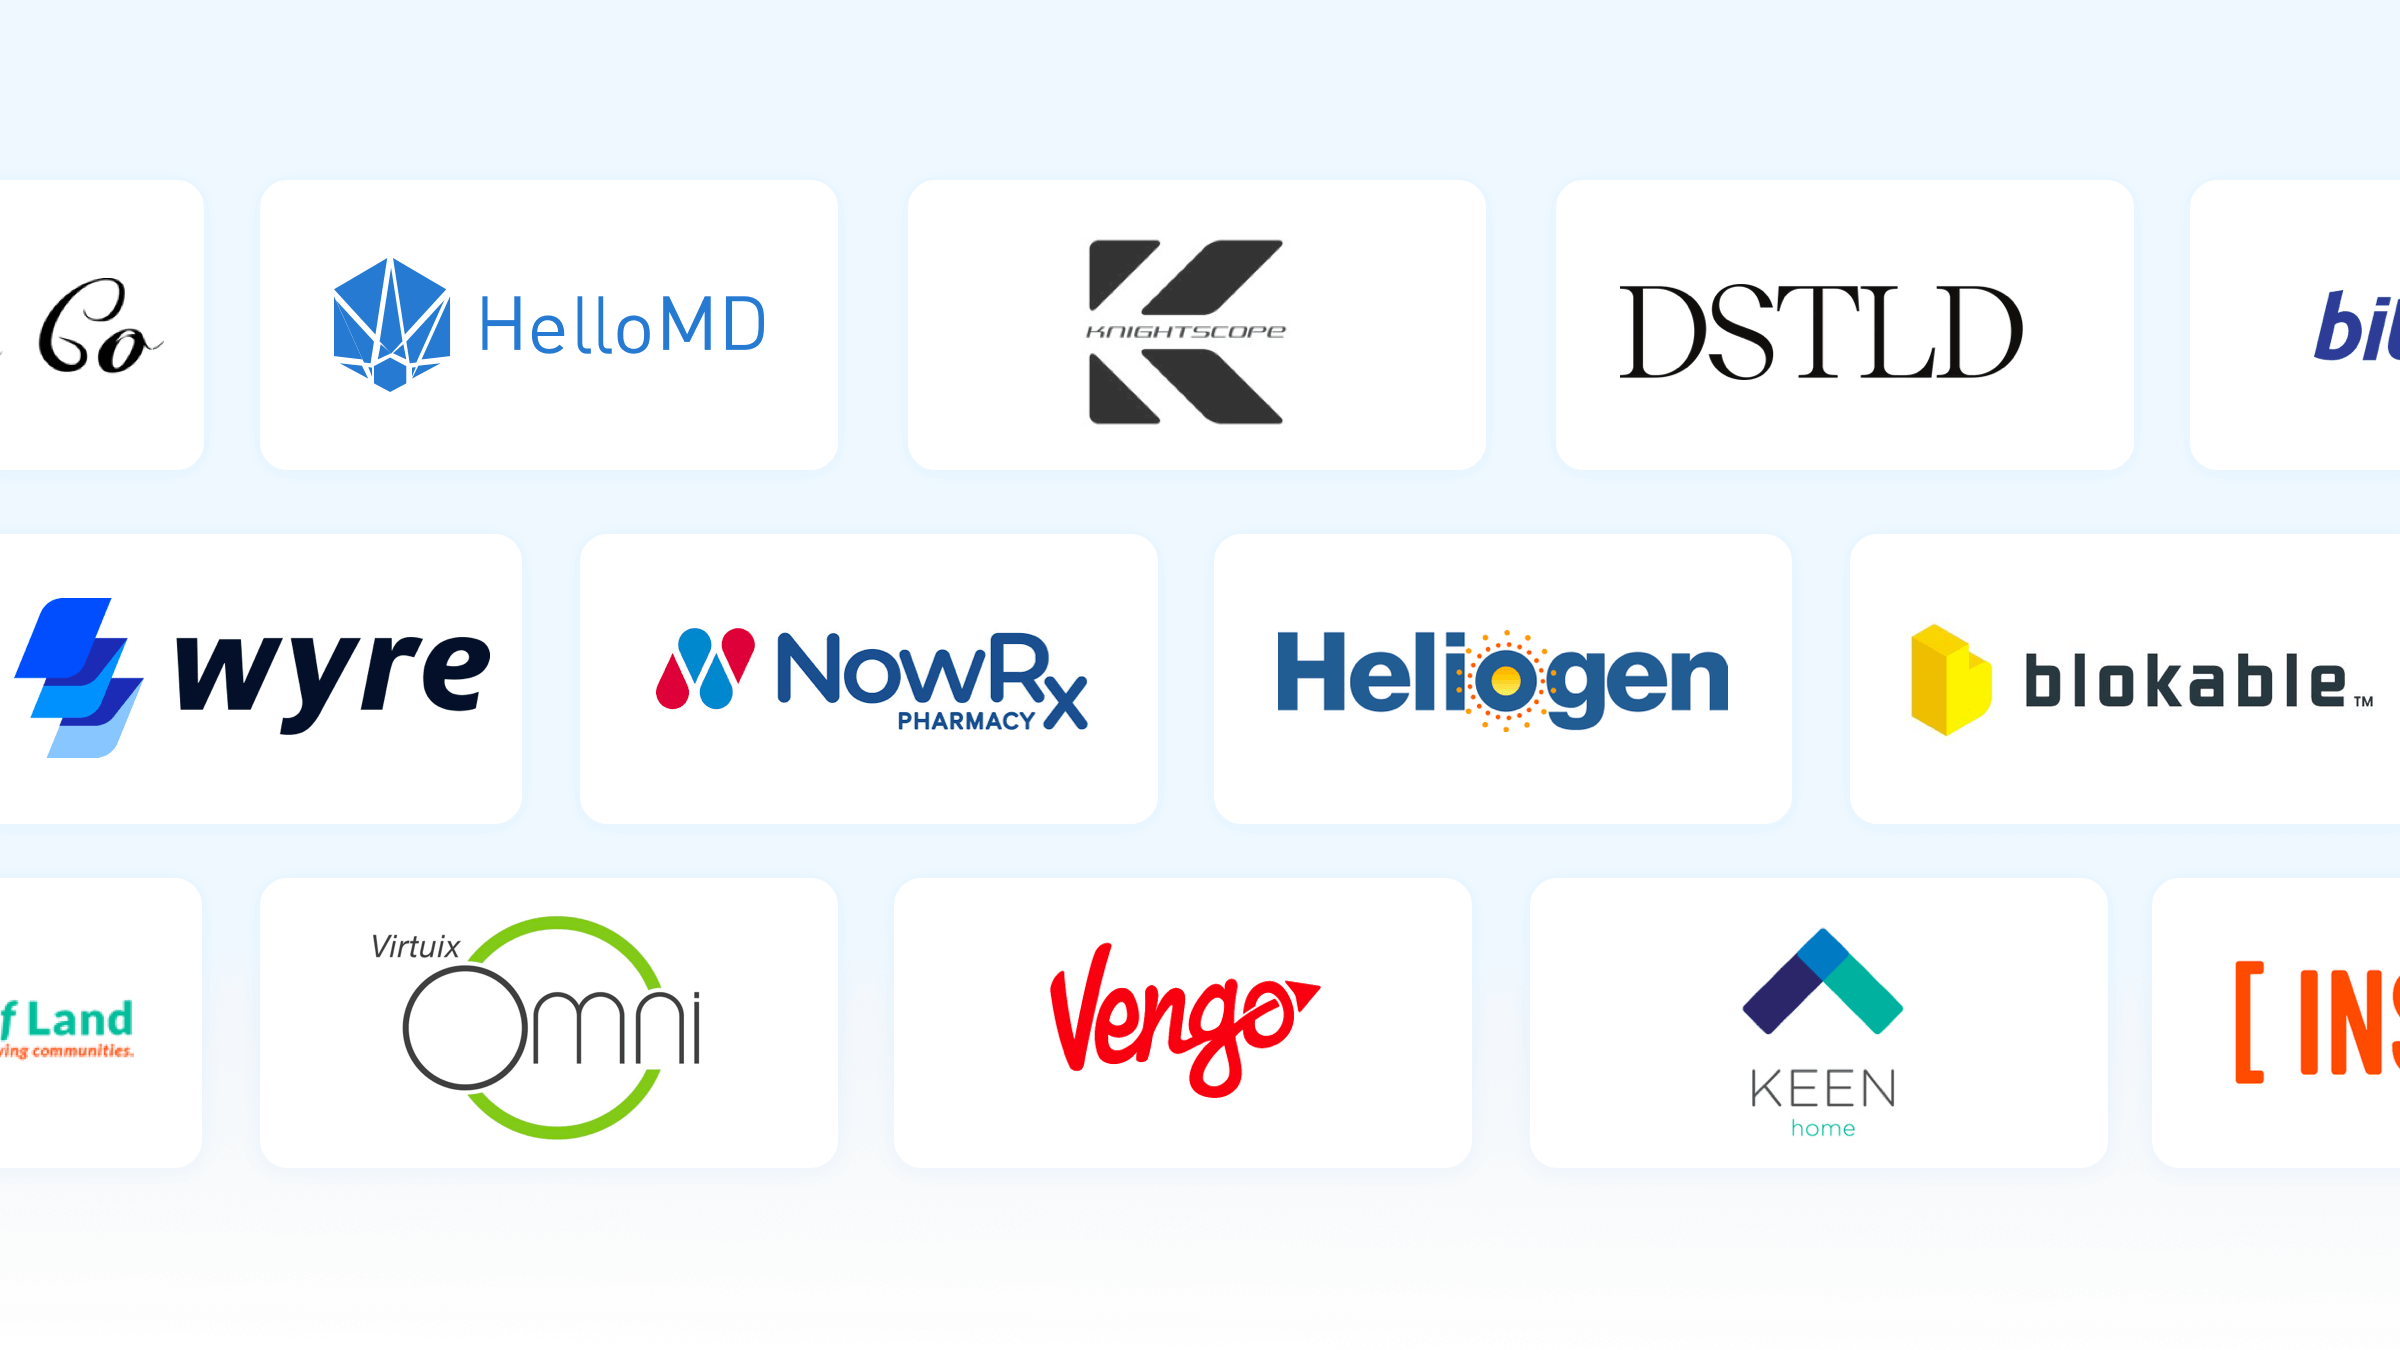 SeedInvest portfolio companies span a range of industries, from healthtech to VR, cleantech, and consumer.